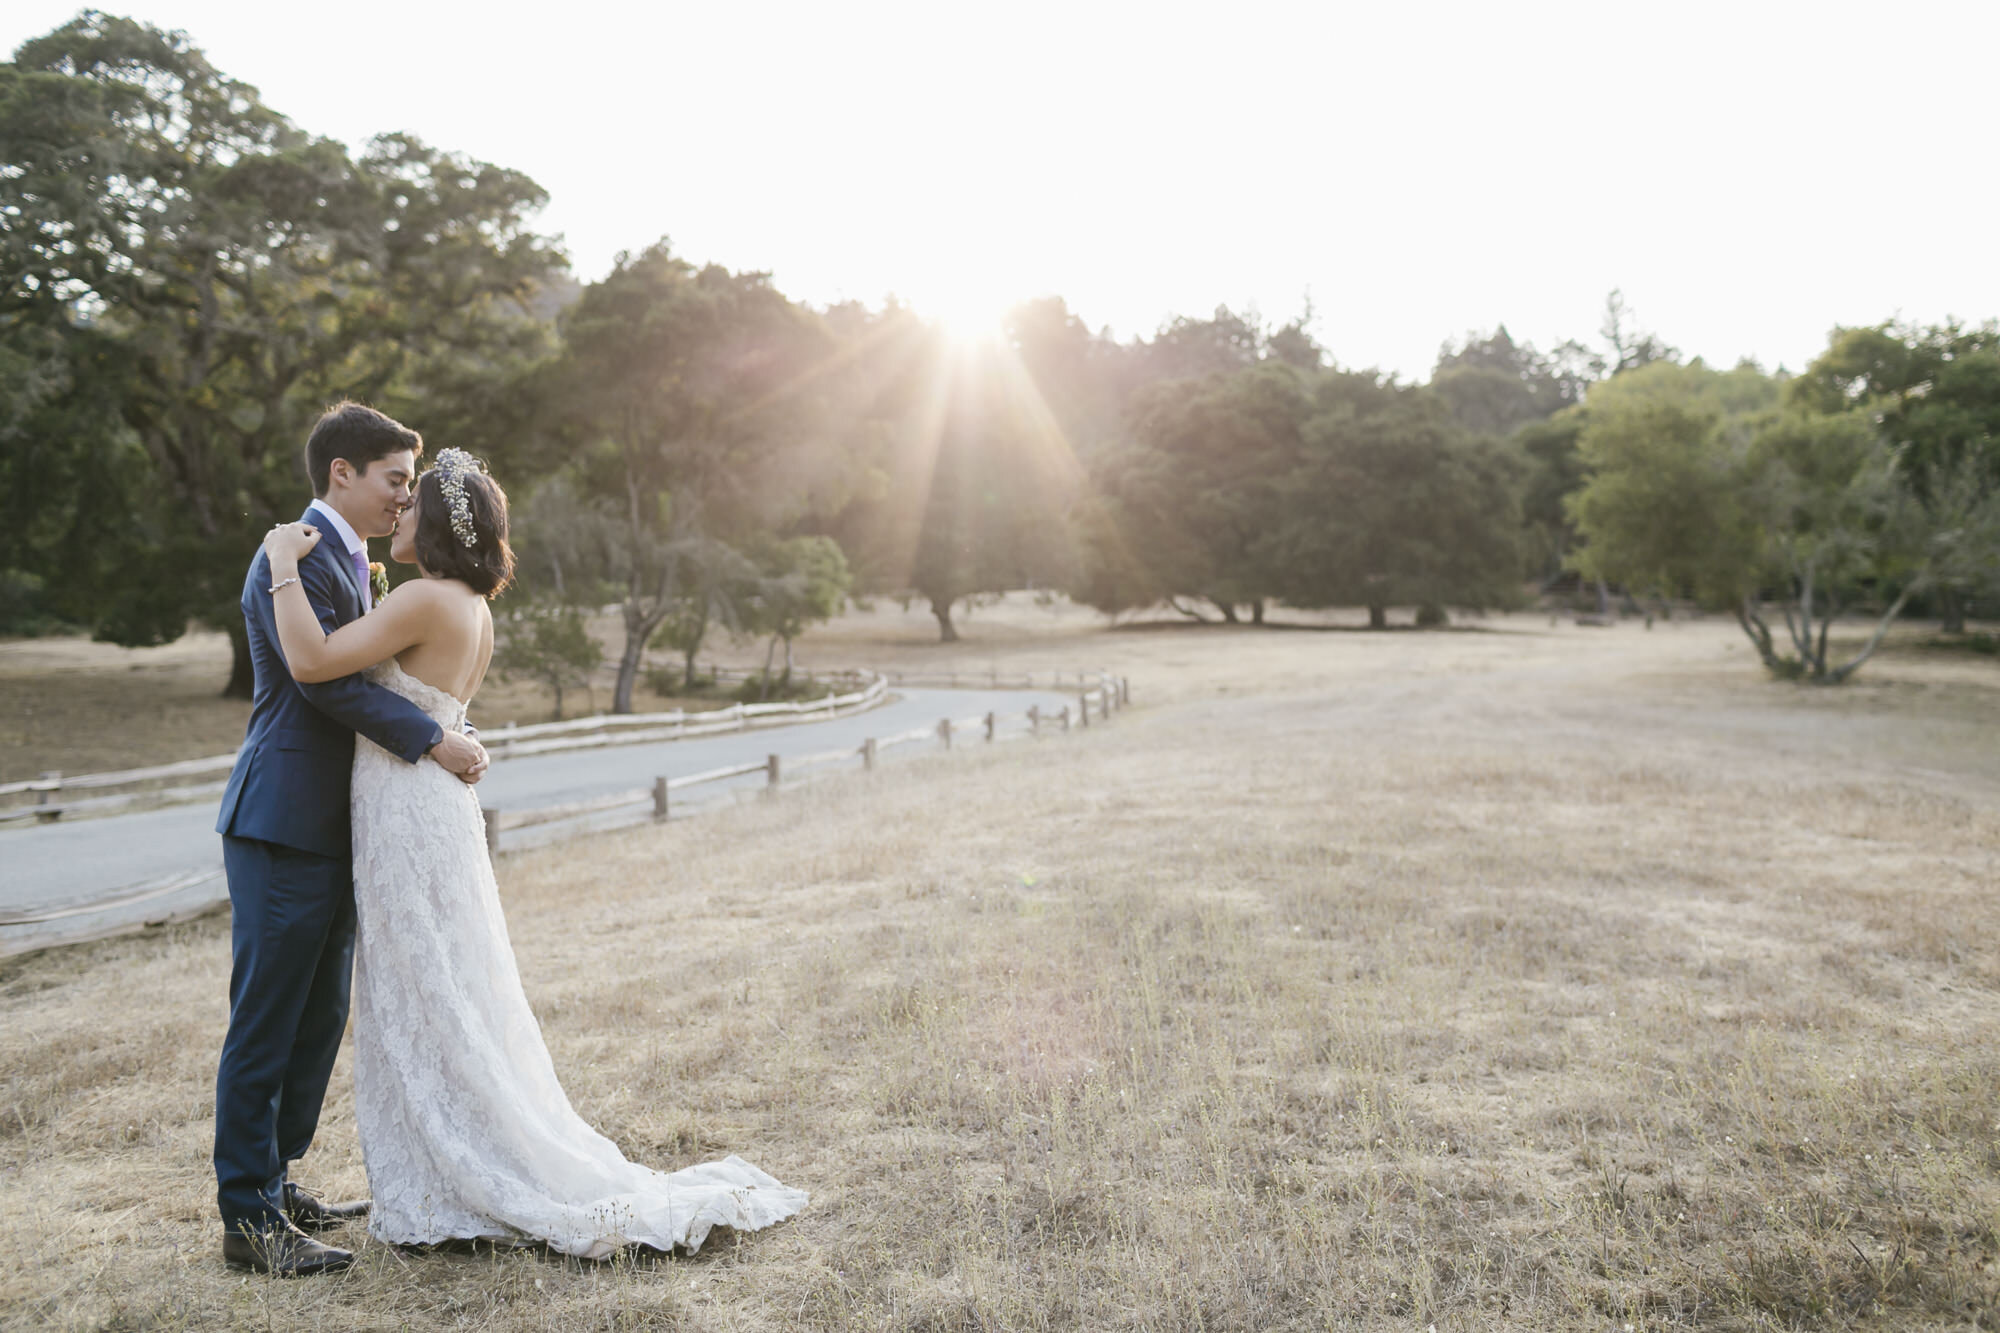 Bride and groom at sunset for their wedding portraits